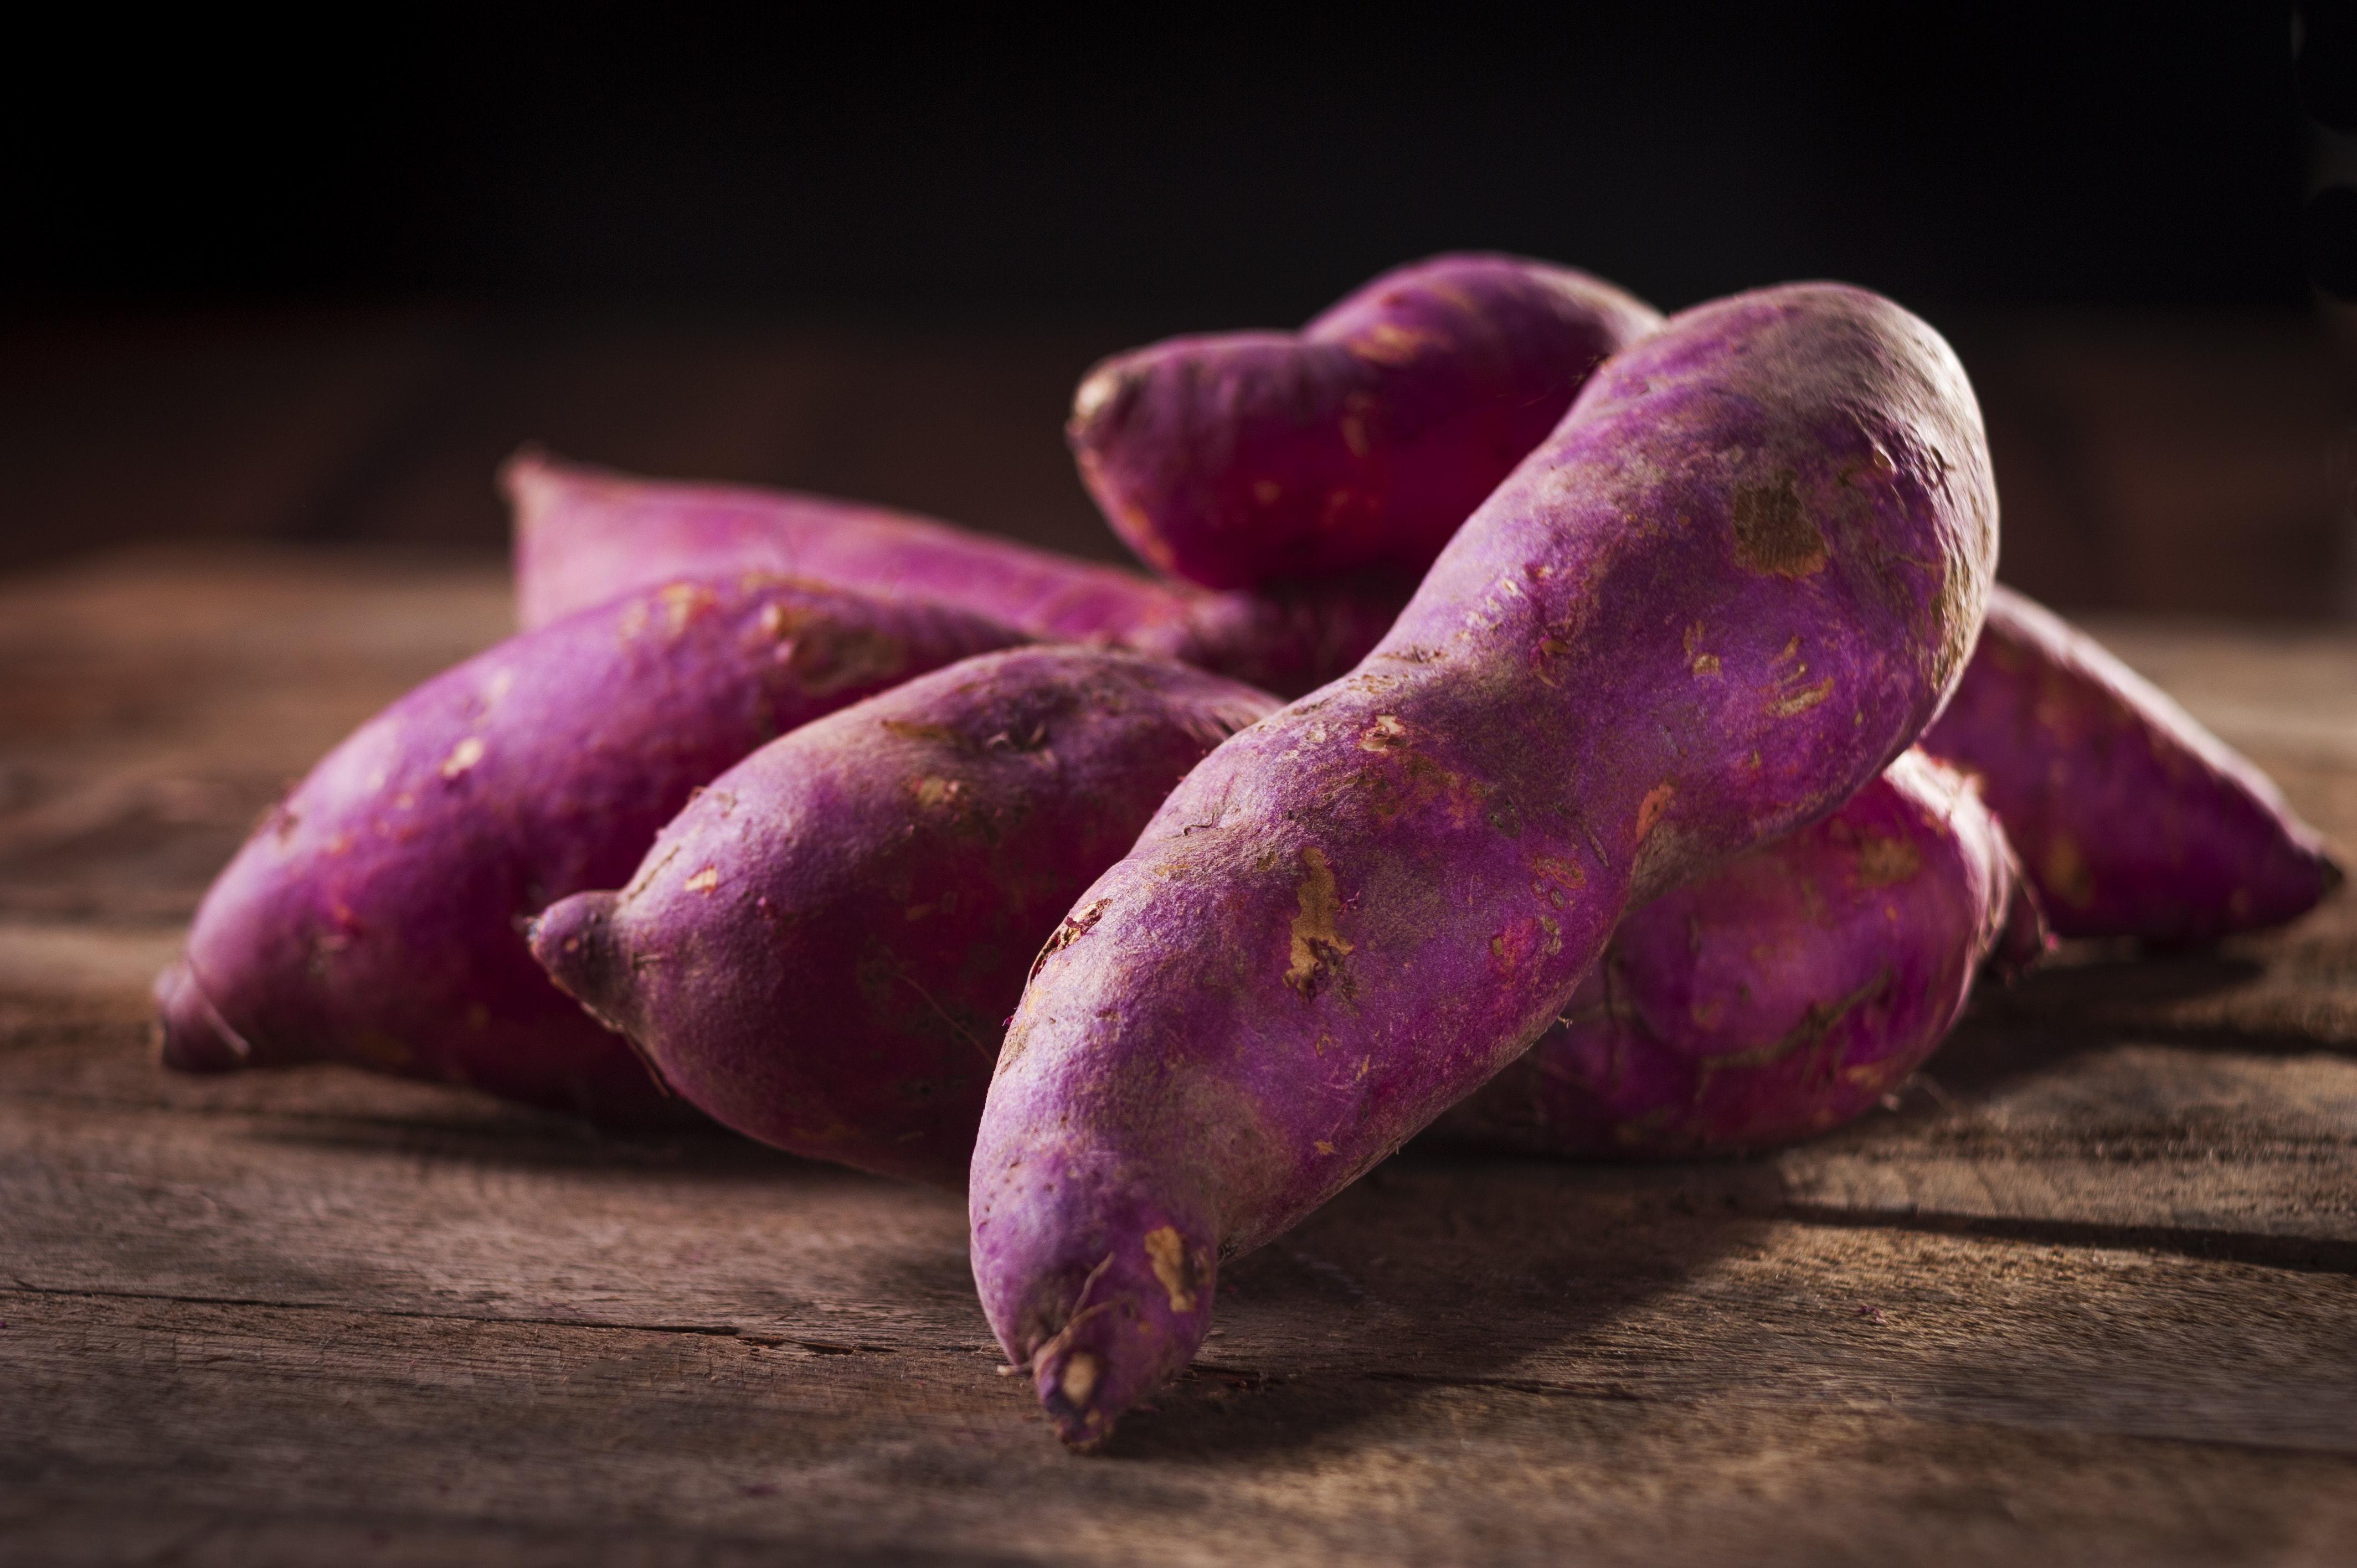 How Many Sweet Potato Slips Per Container 